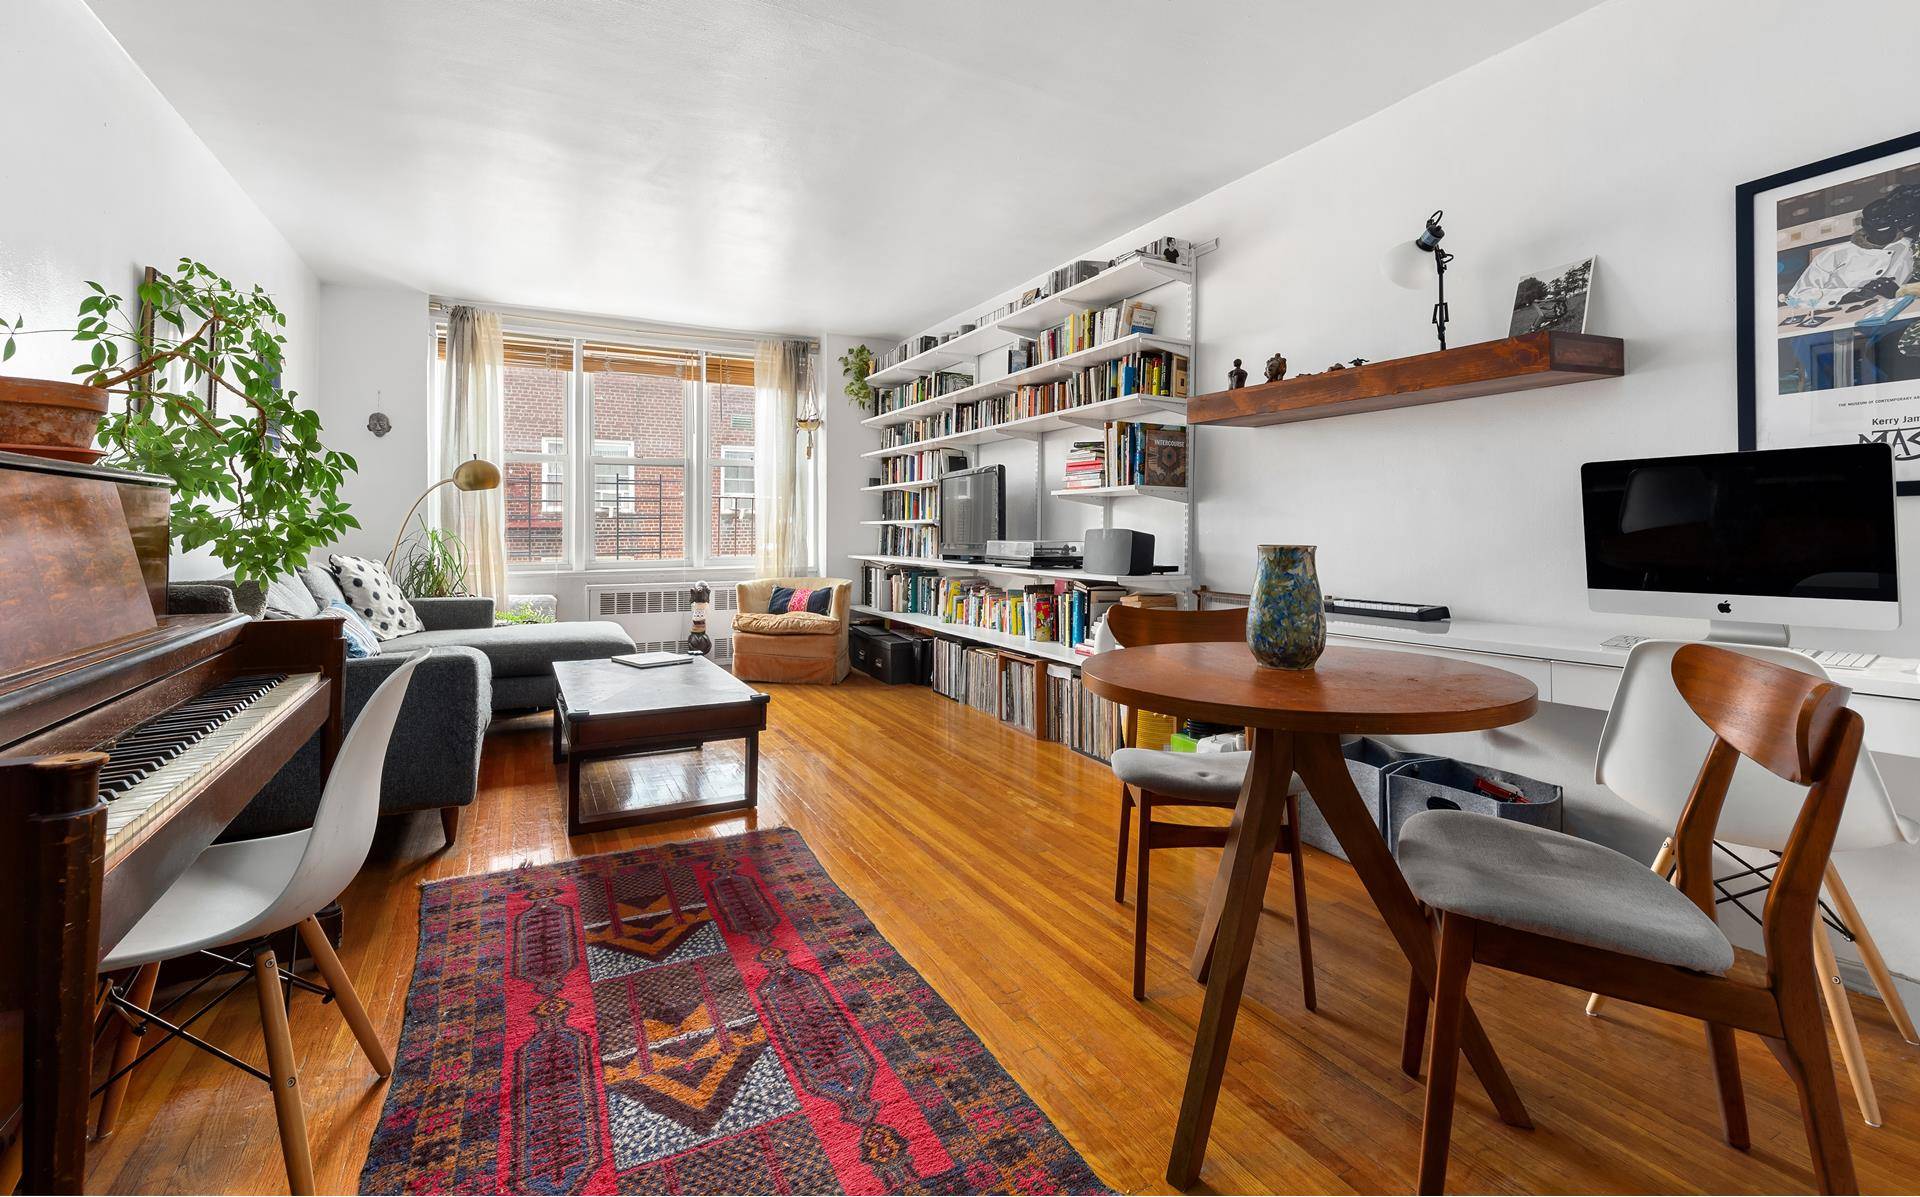 Come see this sunny, top floor apartment in a well maintained, mid century modern, full service coop right off Cortelyou Road !